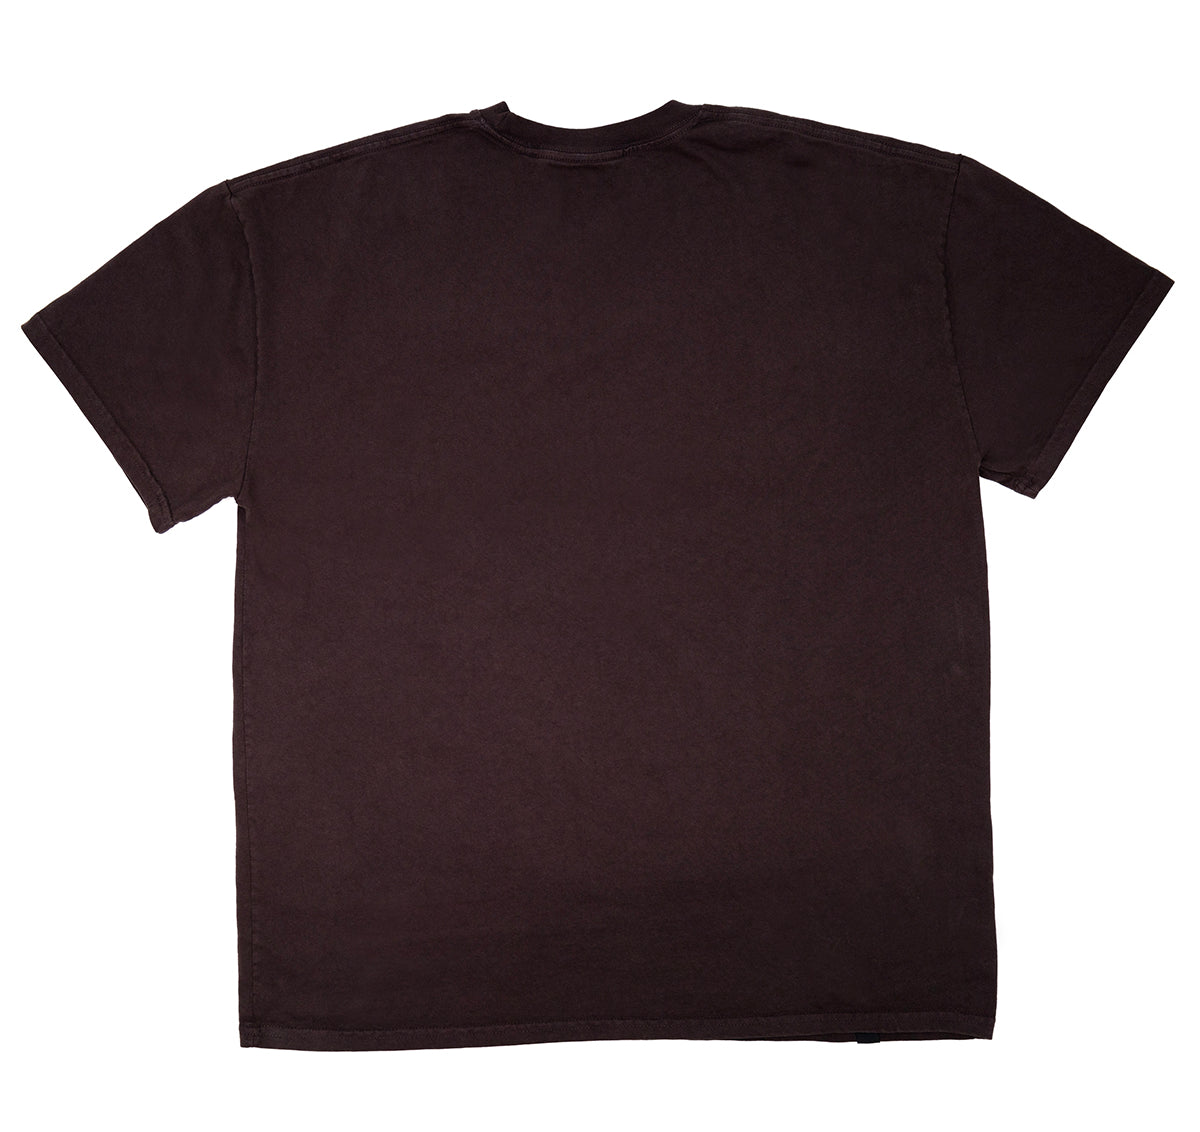 BACK VIEW OF BROWN HEAVYWEIGHT CREED TEE. NO LOGO.